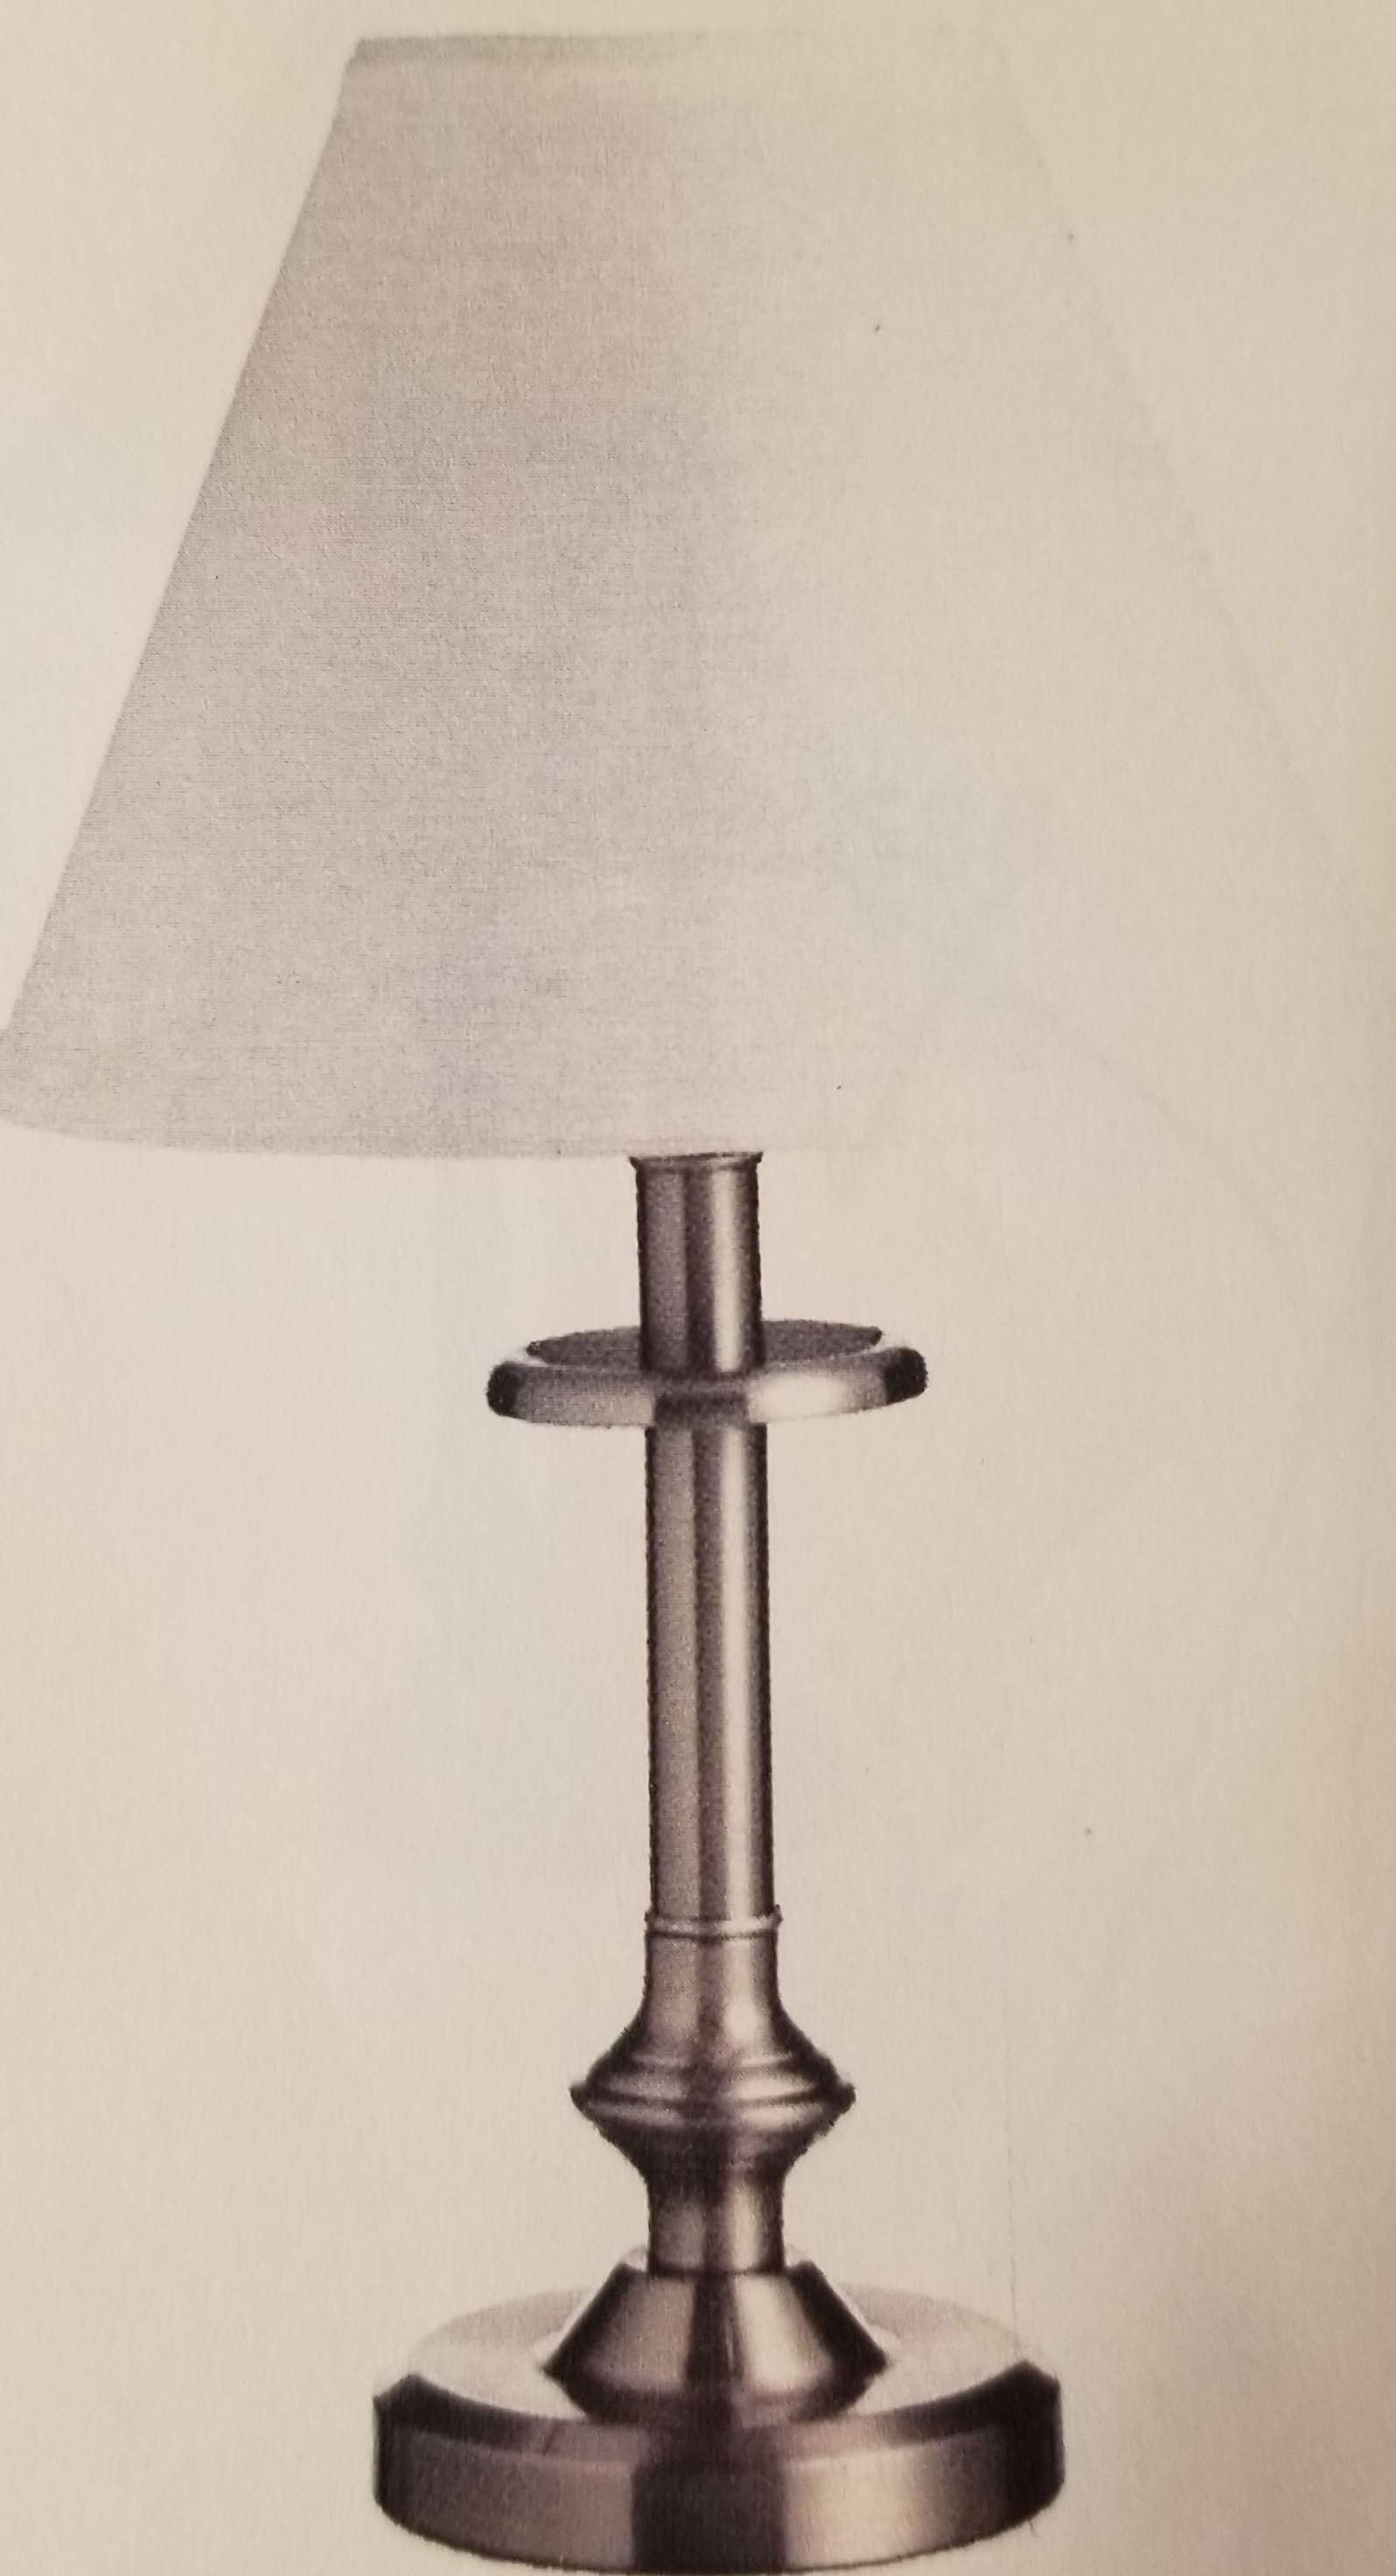 982 Table Lamp
Made in Canada
Available in Antique Brass, 
Brushed Chrome, Black
or Antique Bronze
Regular Price $105.99
Sale Price $74.99